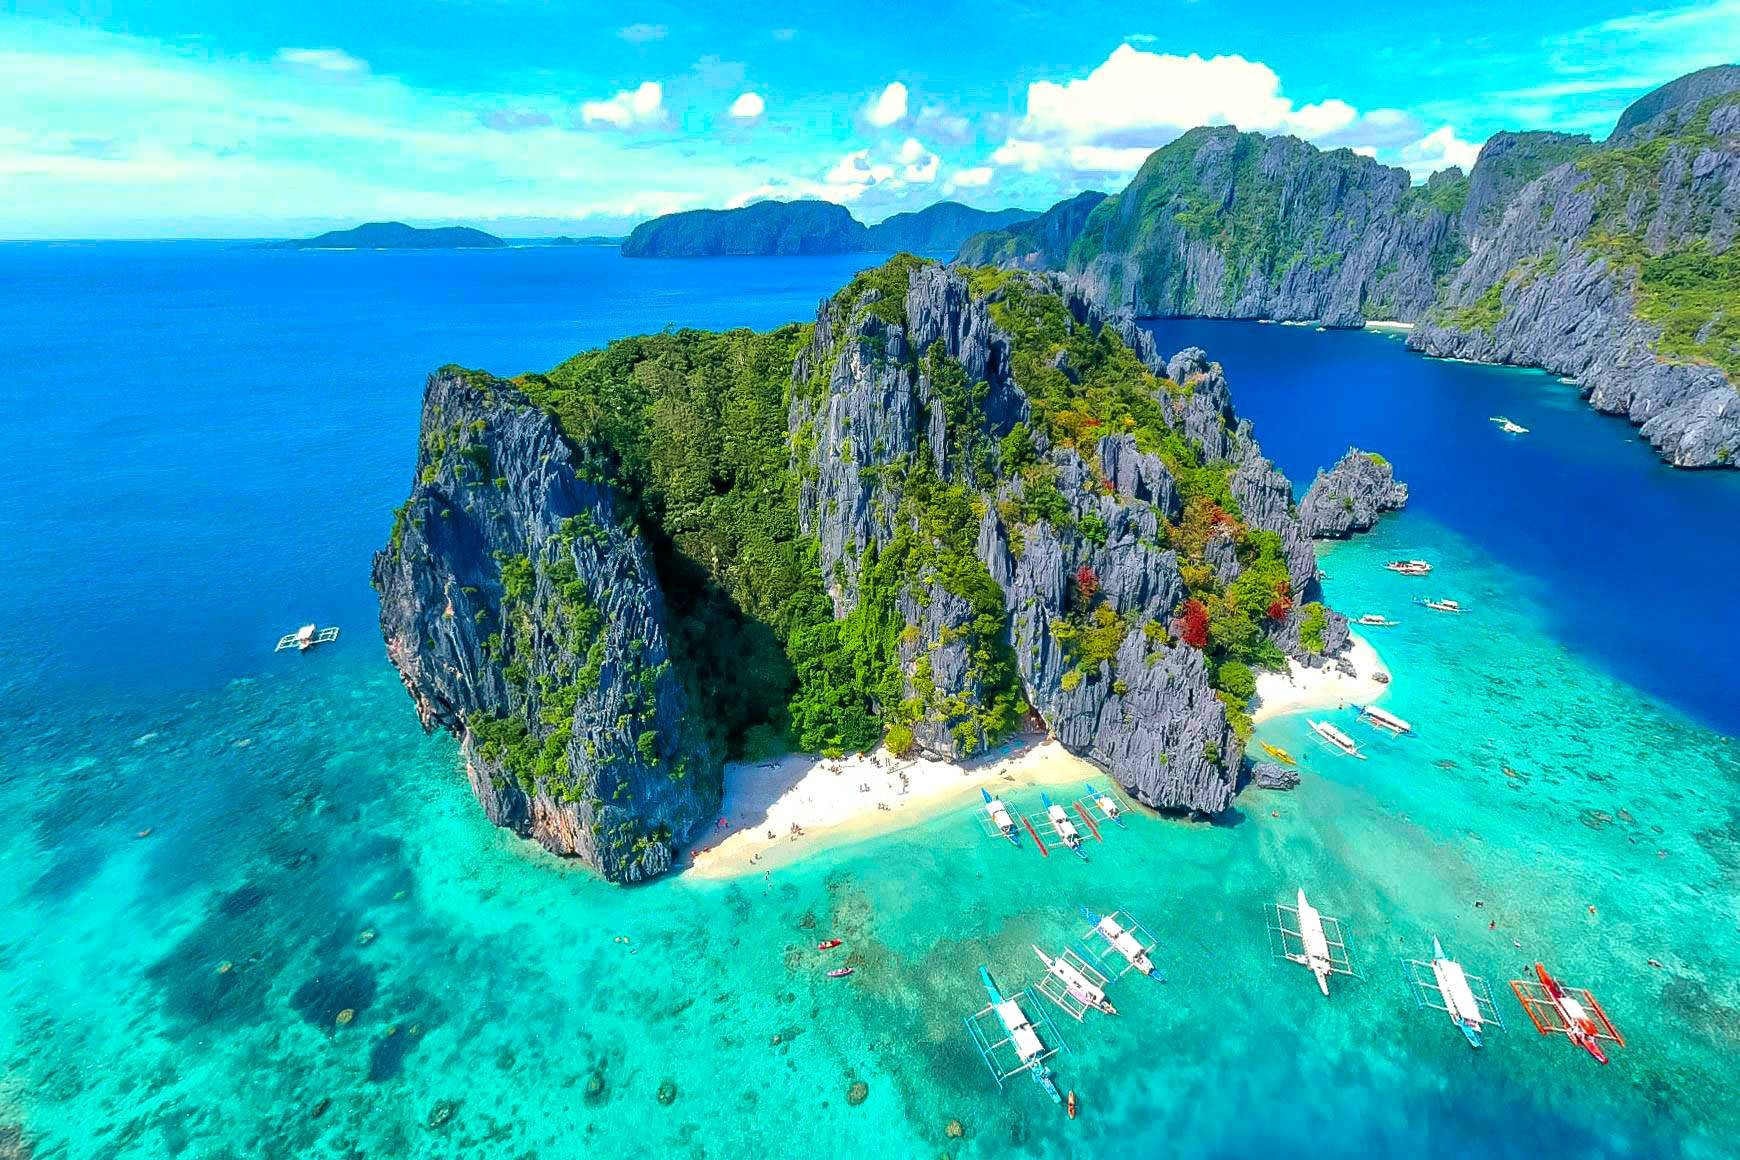  Palawan, The Philippines